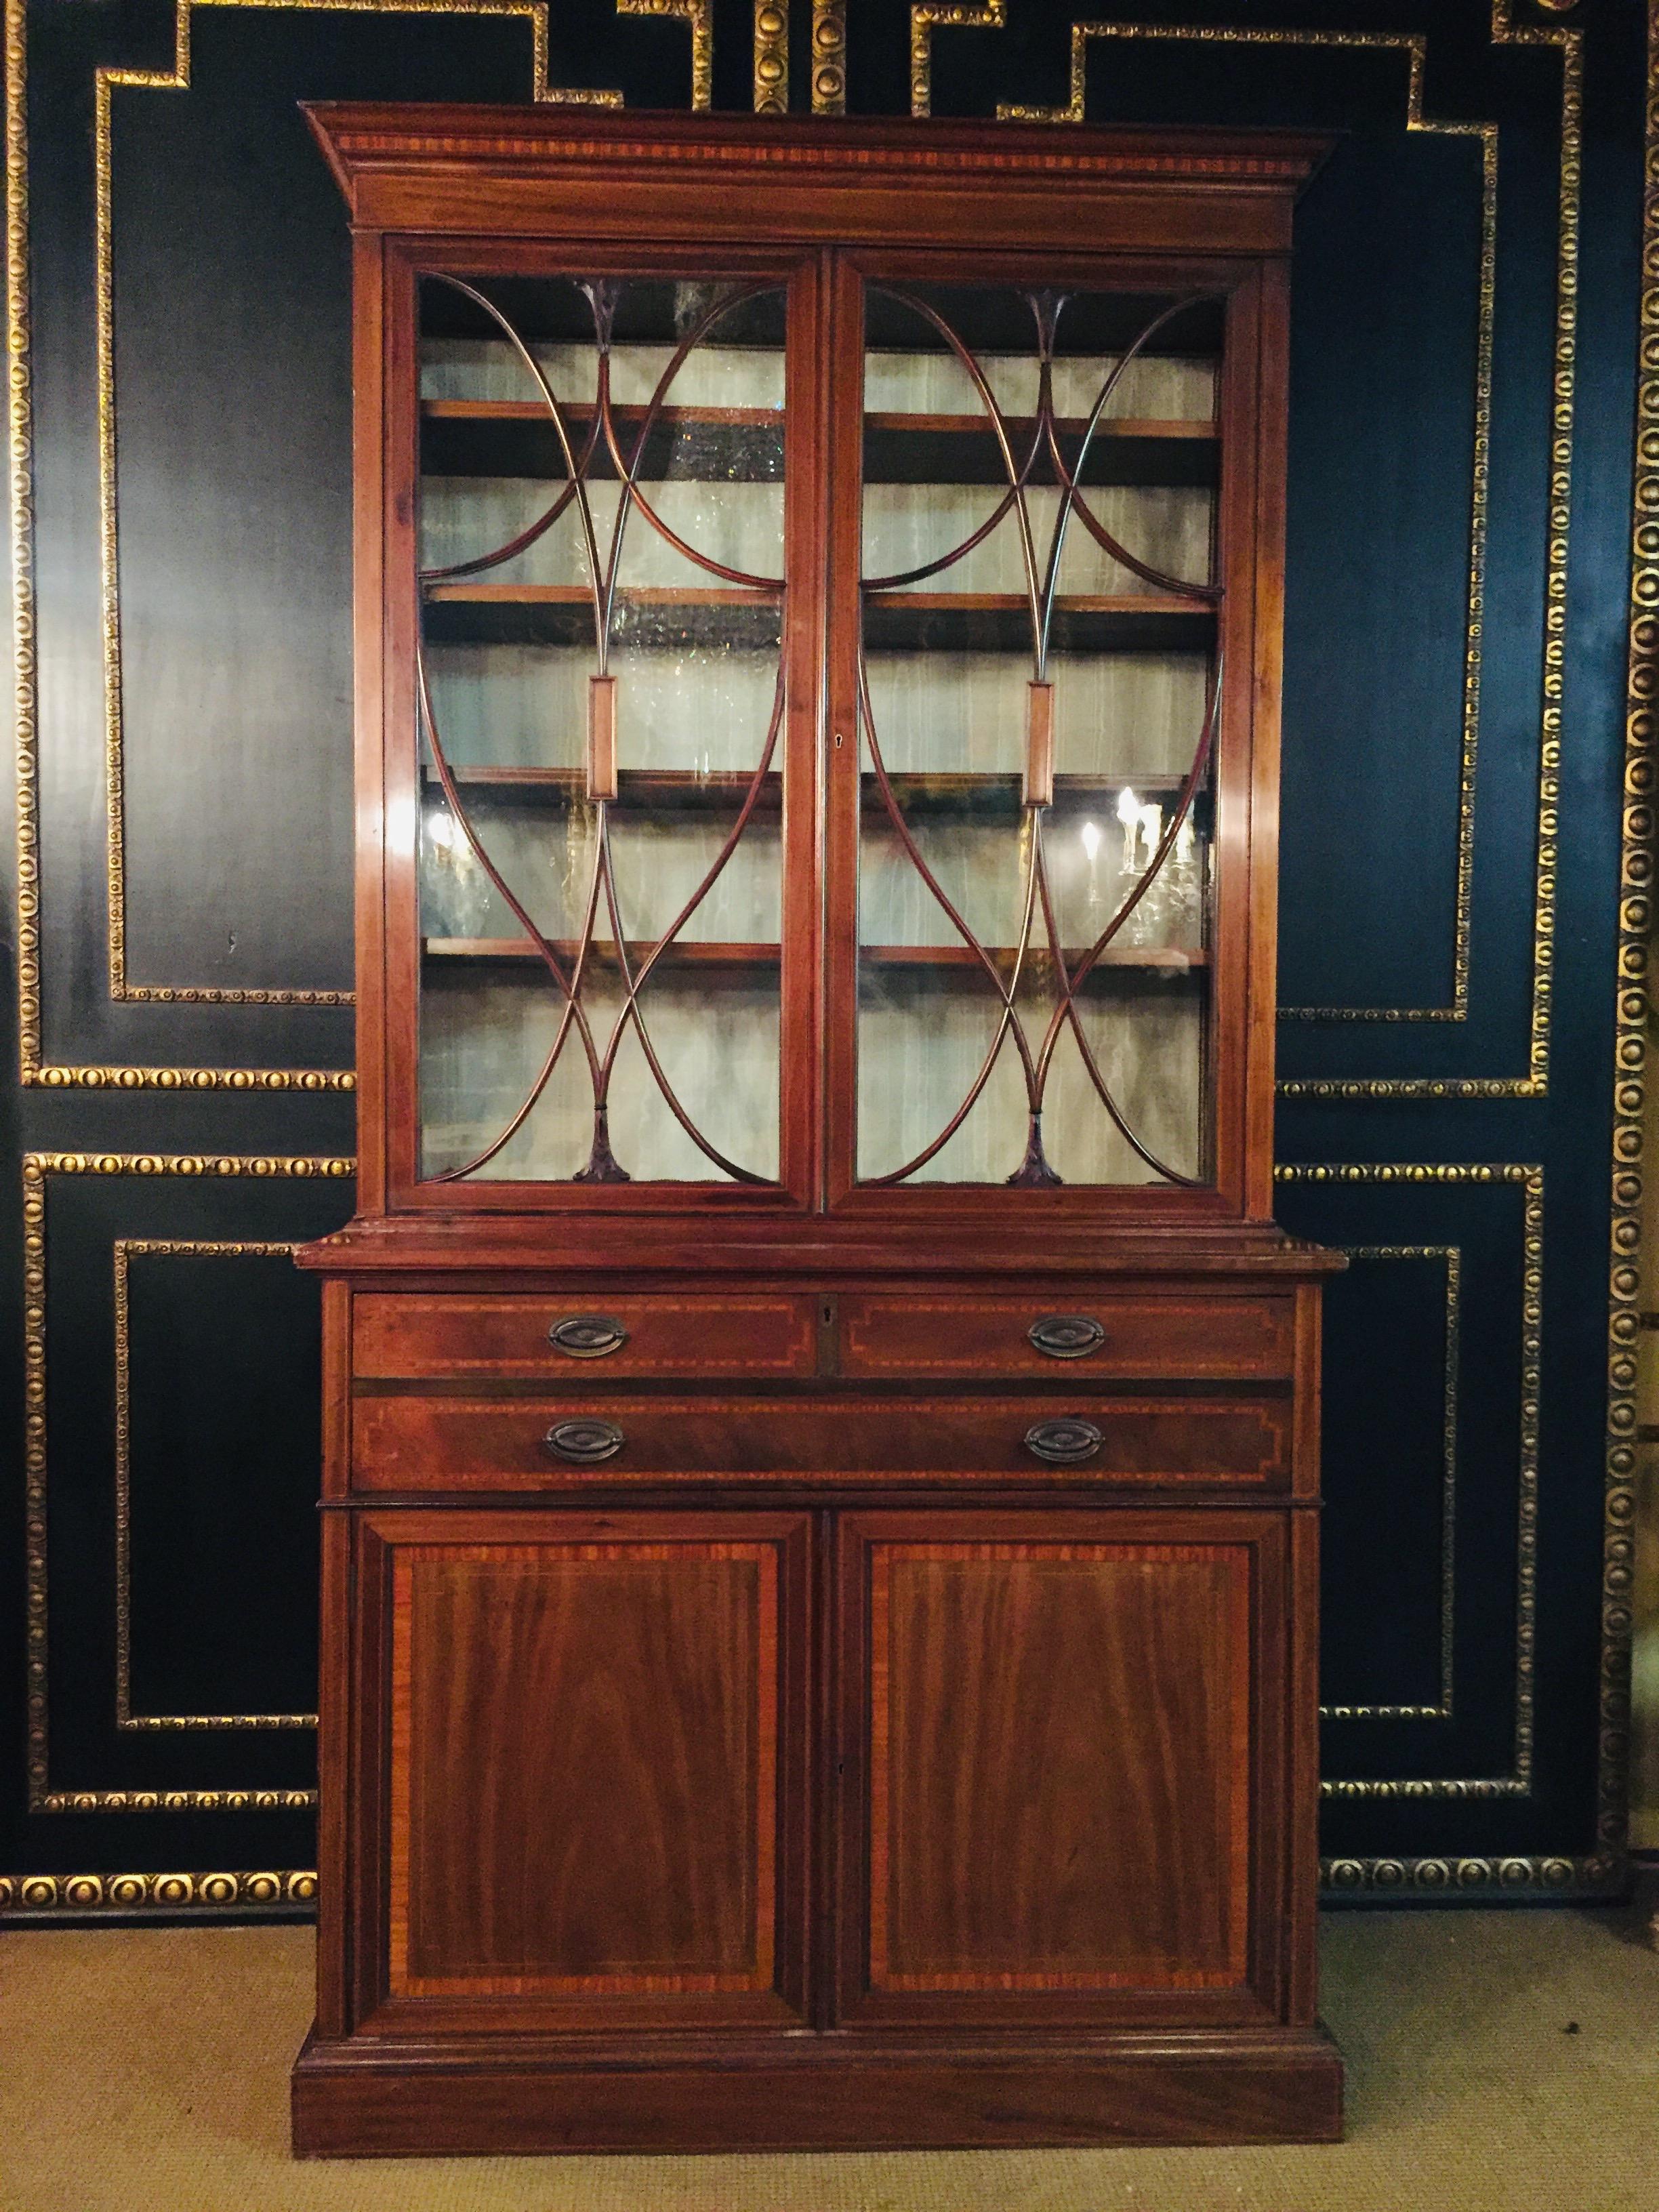 Sheraton mahogany bureau bookcase. With a moulded cornice and glazed and mullioned doors opening to three shelves. A fall-front desk with original brass oval handles opens to folio racks, drawers, and a leather writing surface. All above two paneled